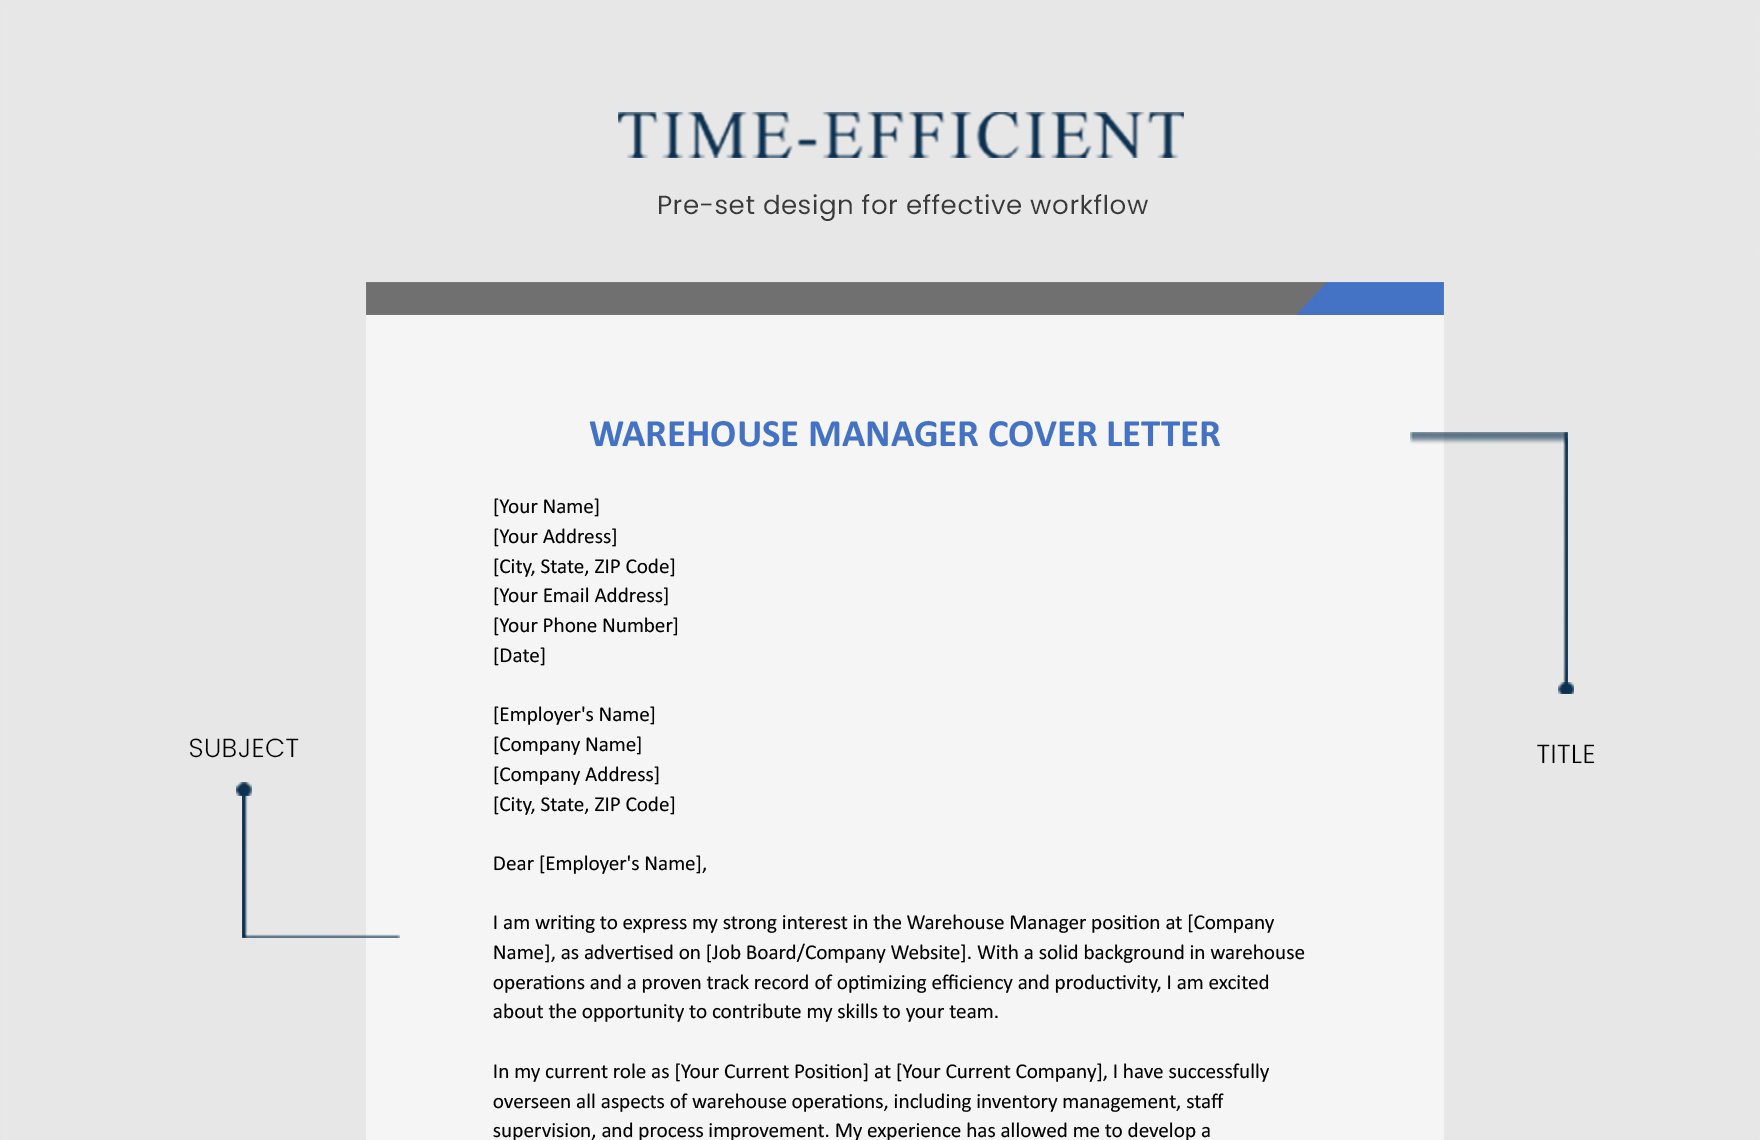 Warehouse Manager Cover Letter